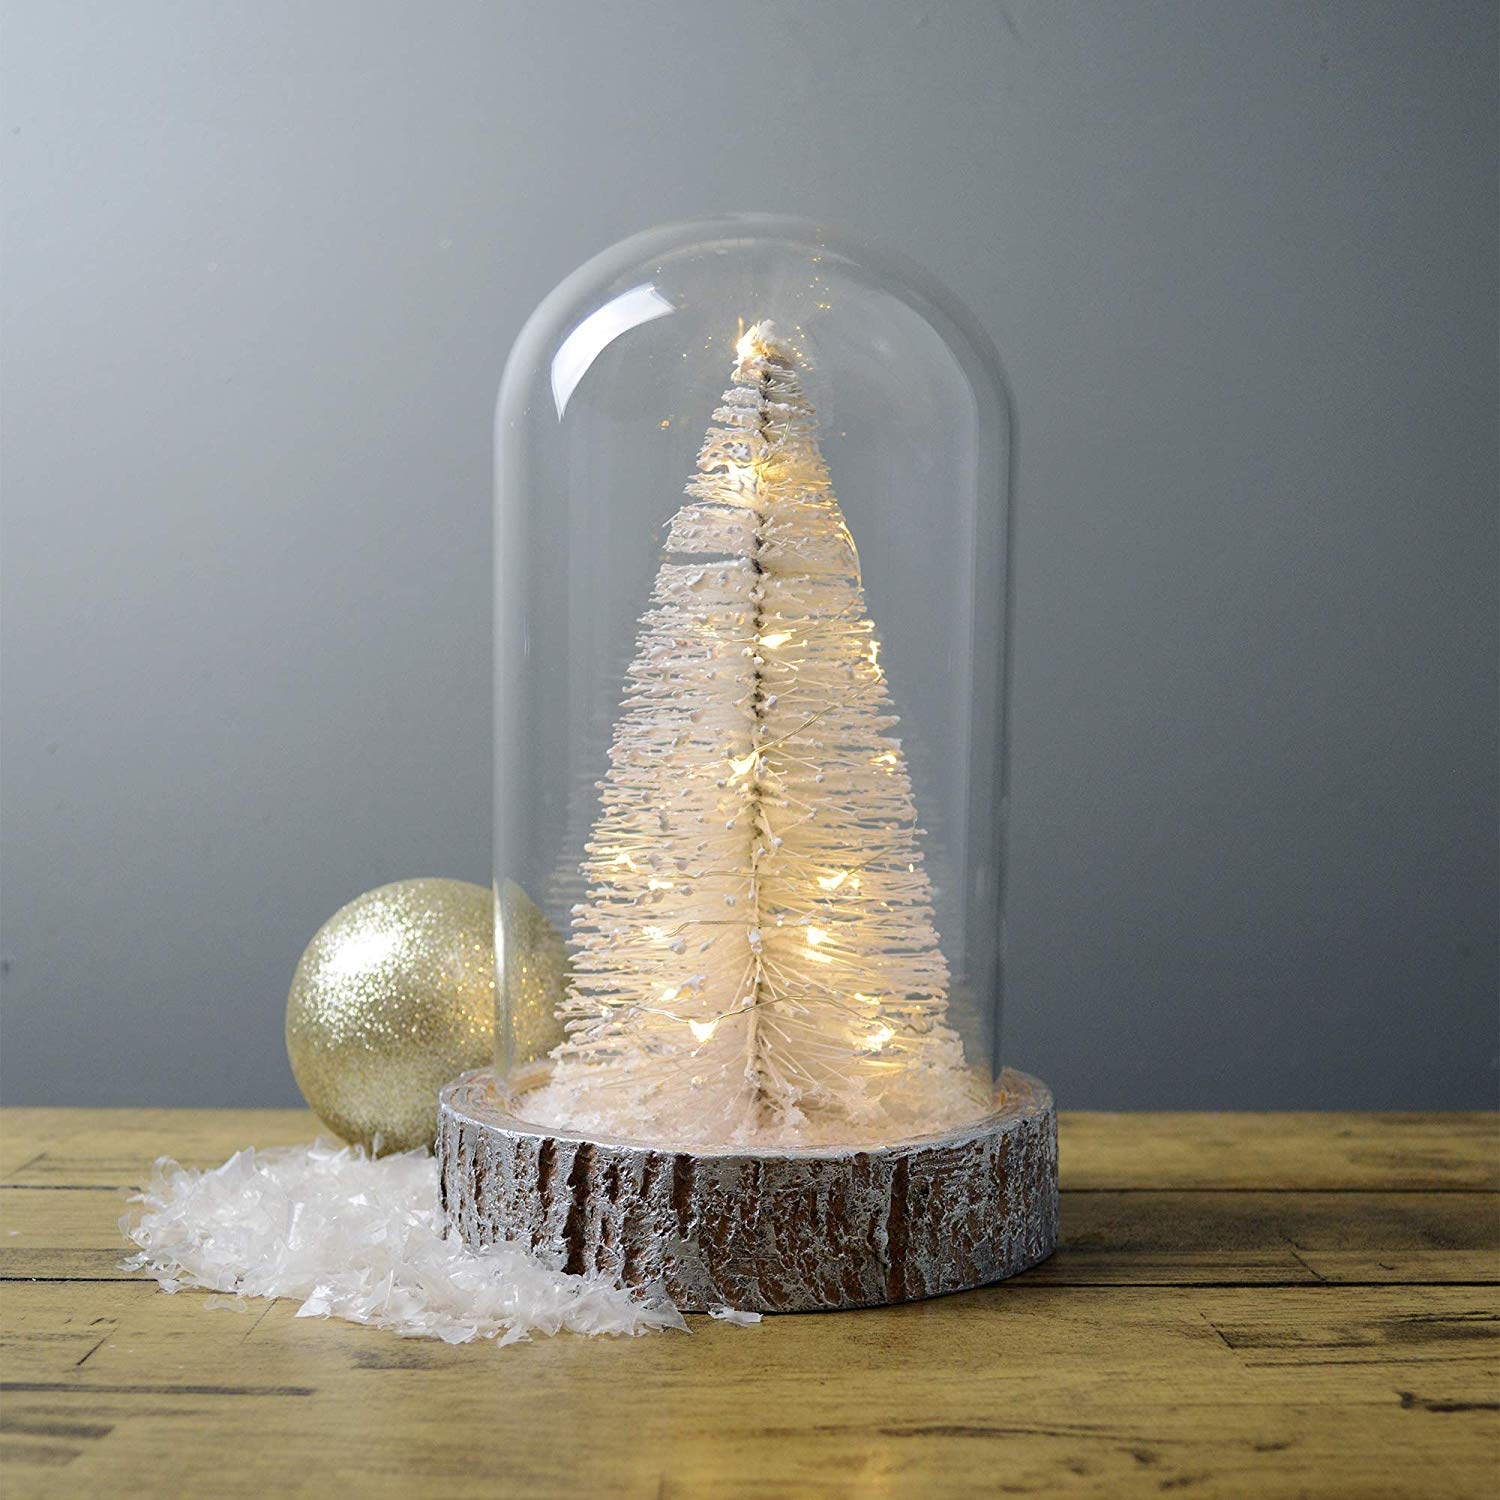 Top 10 Festive Amazon Christmas Decorations  Healthy By Heather Brown